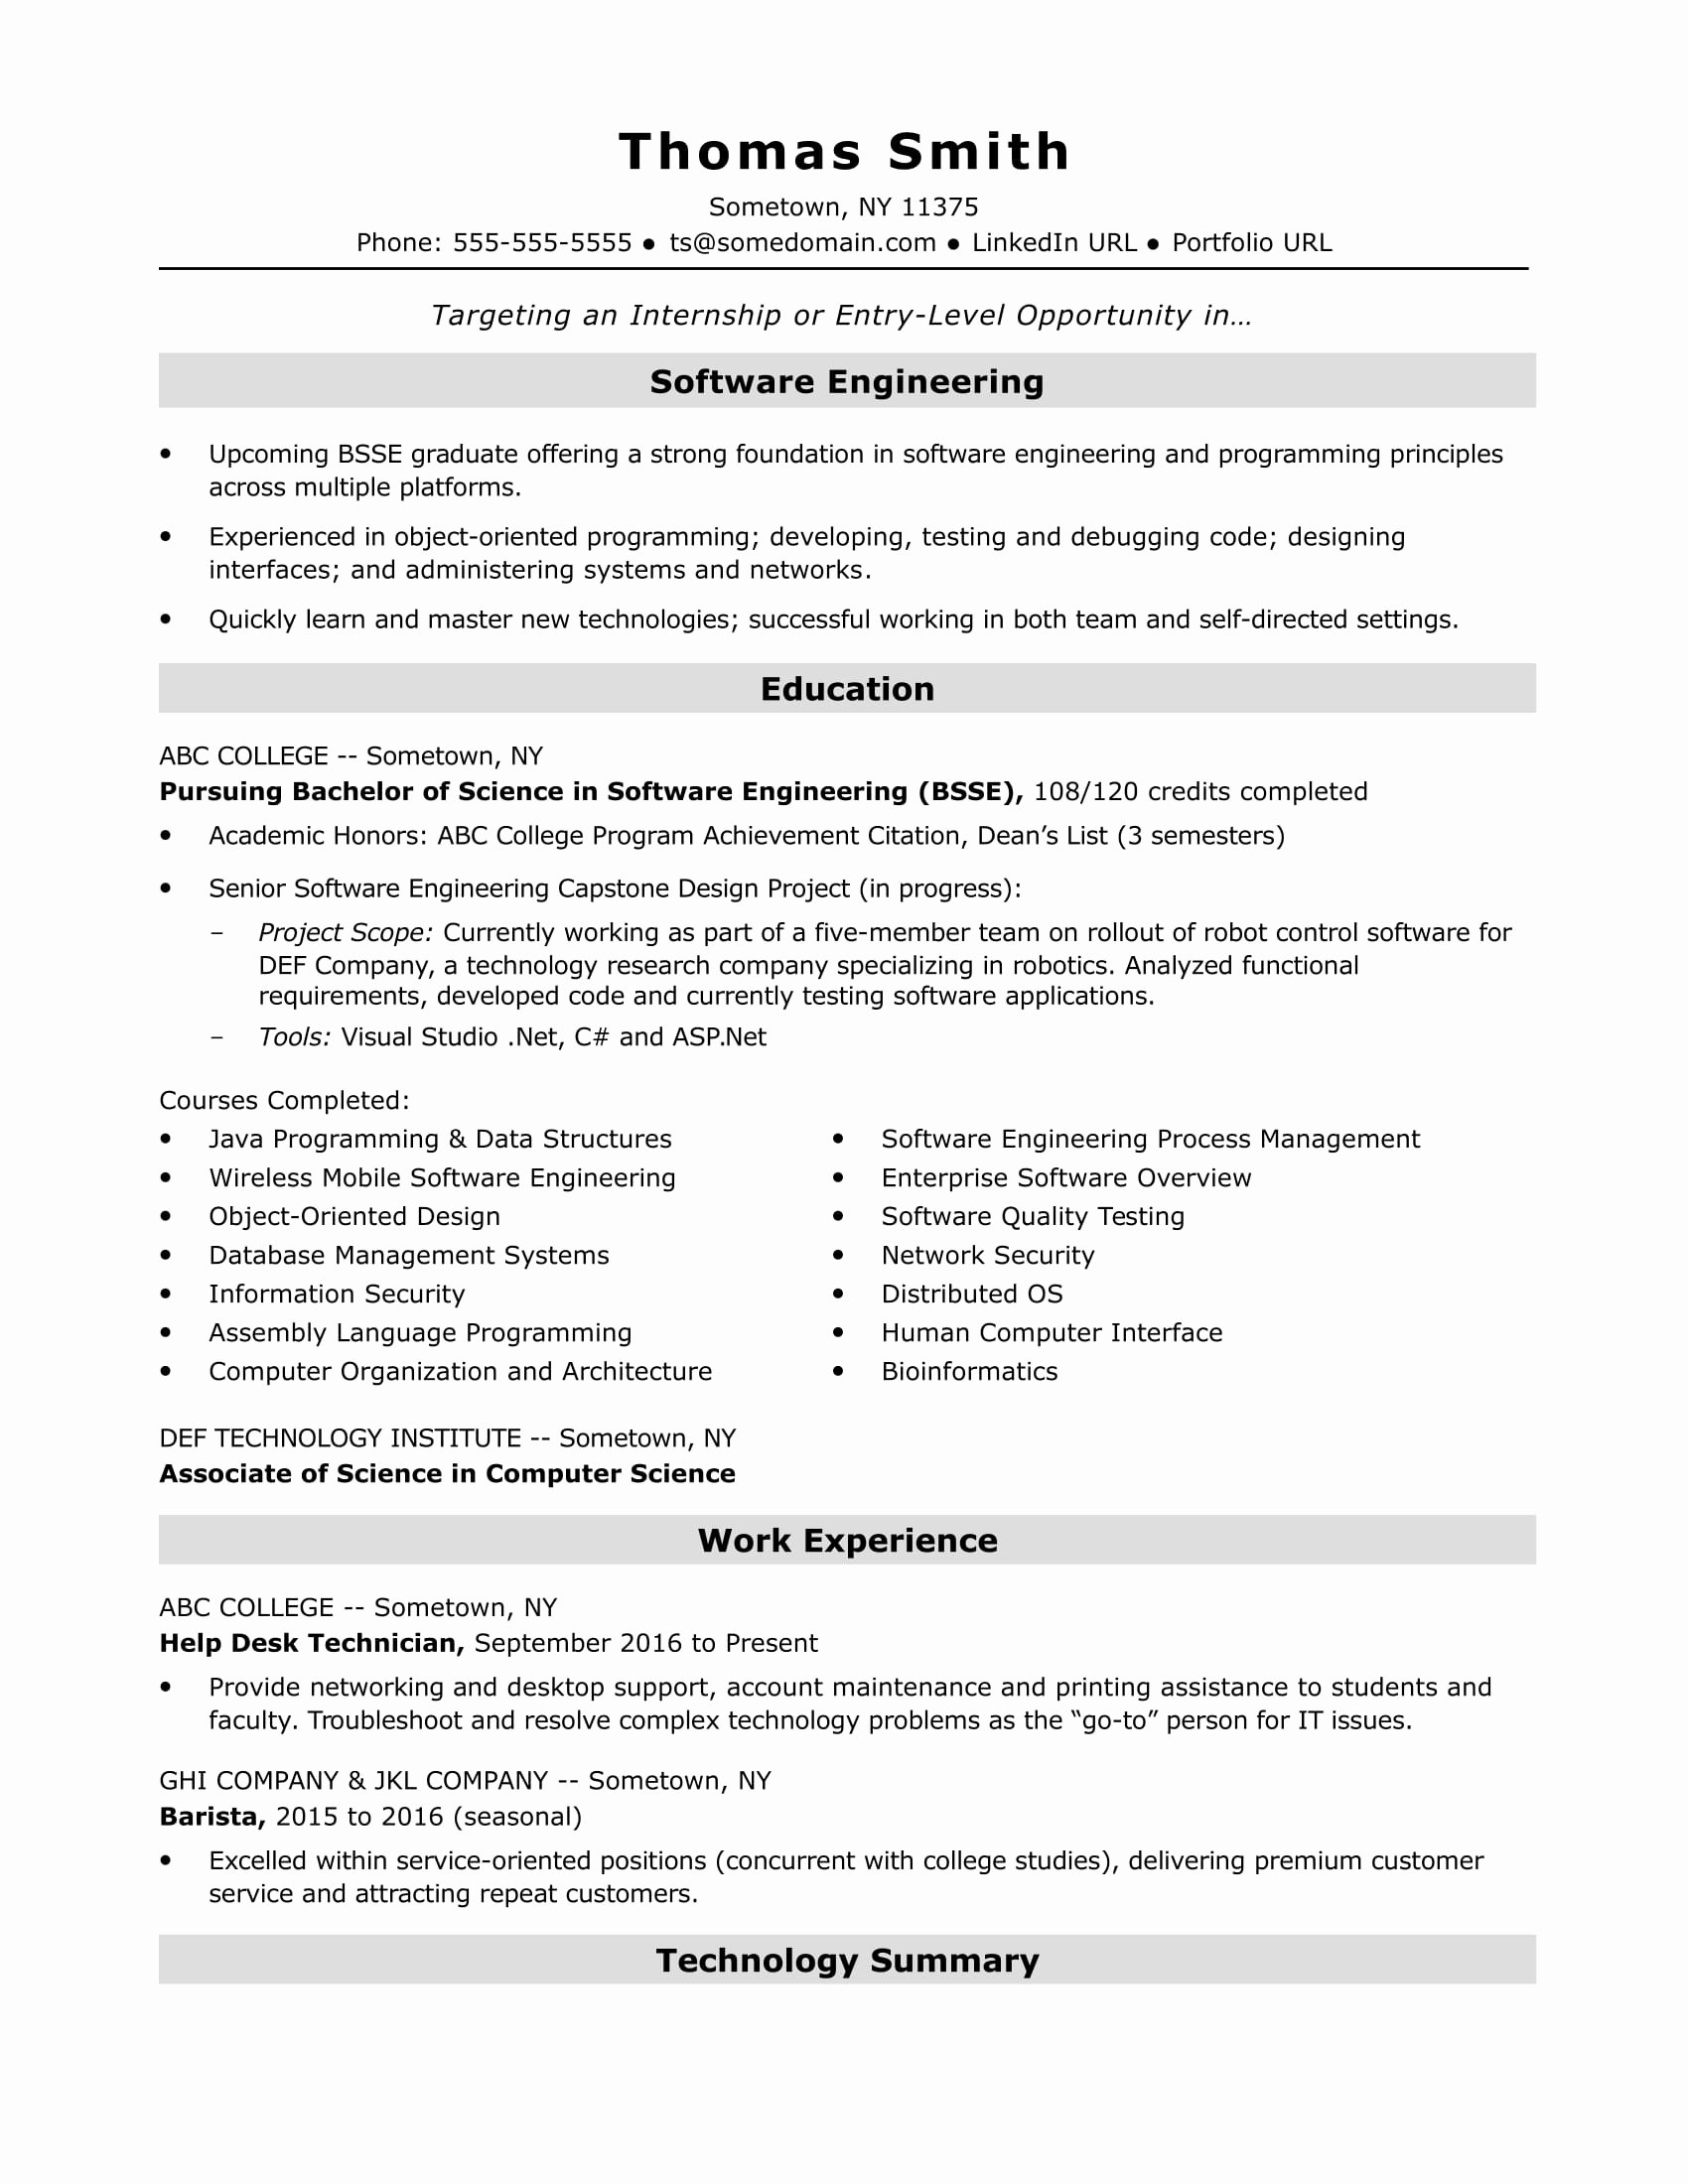 resume-template-software-engineer-latter-example-template